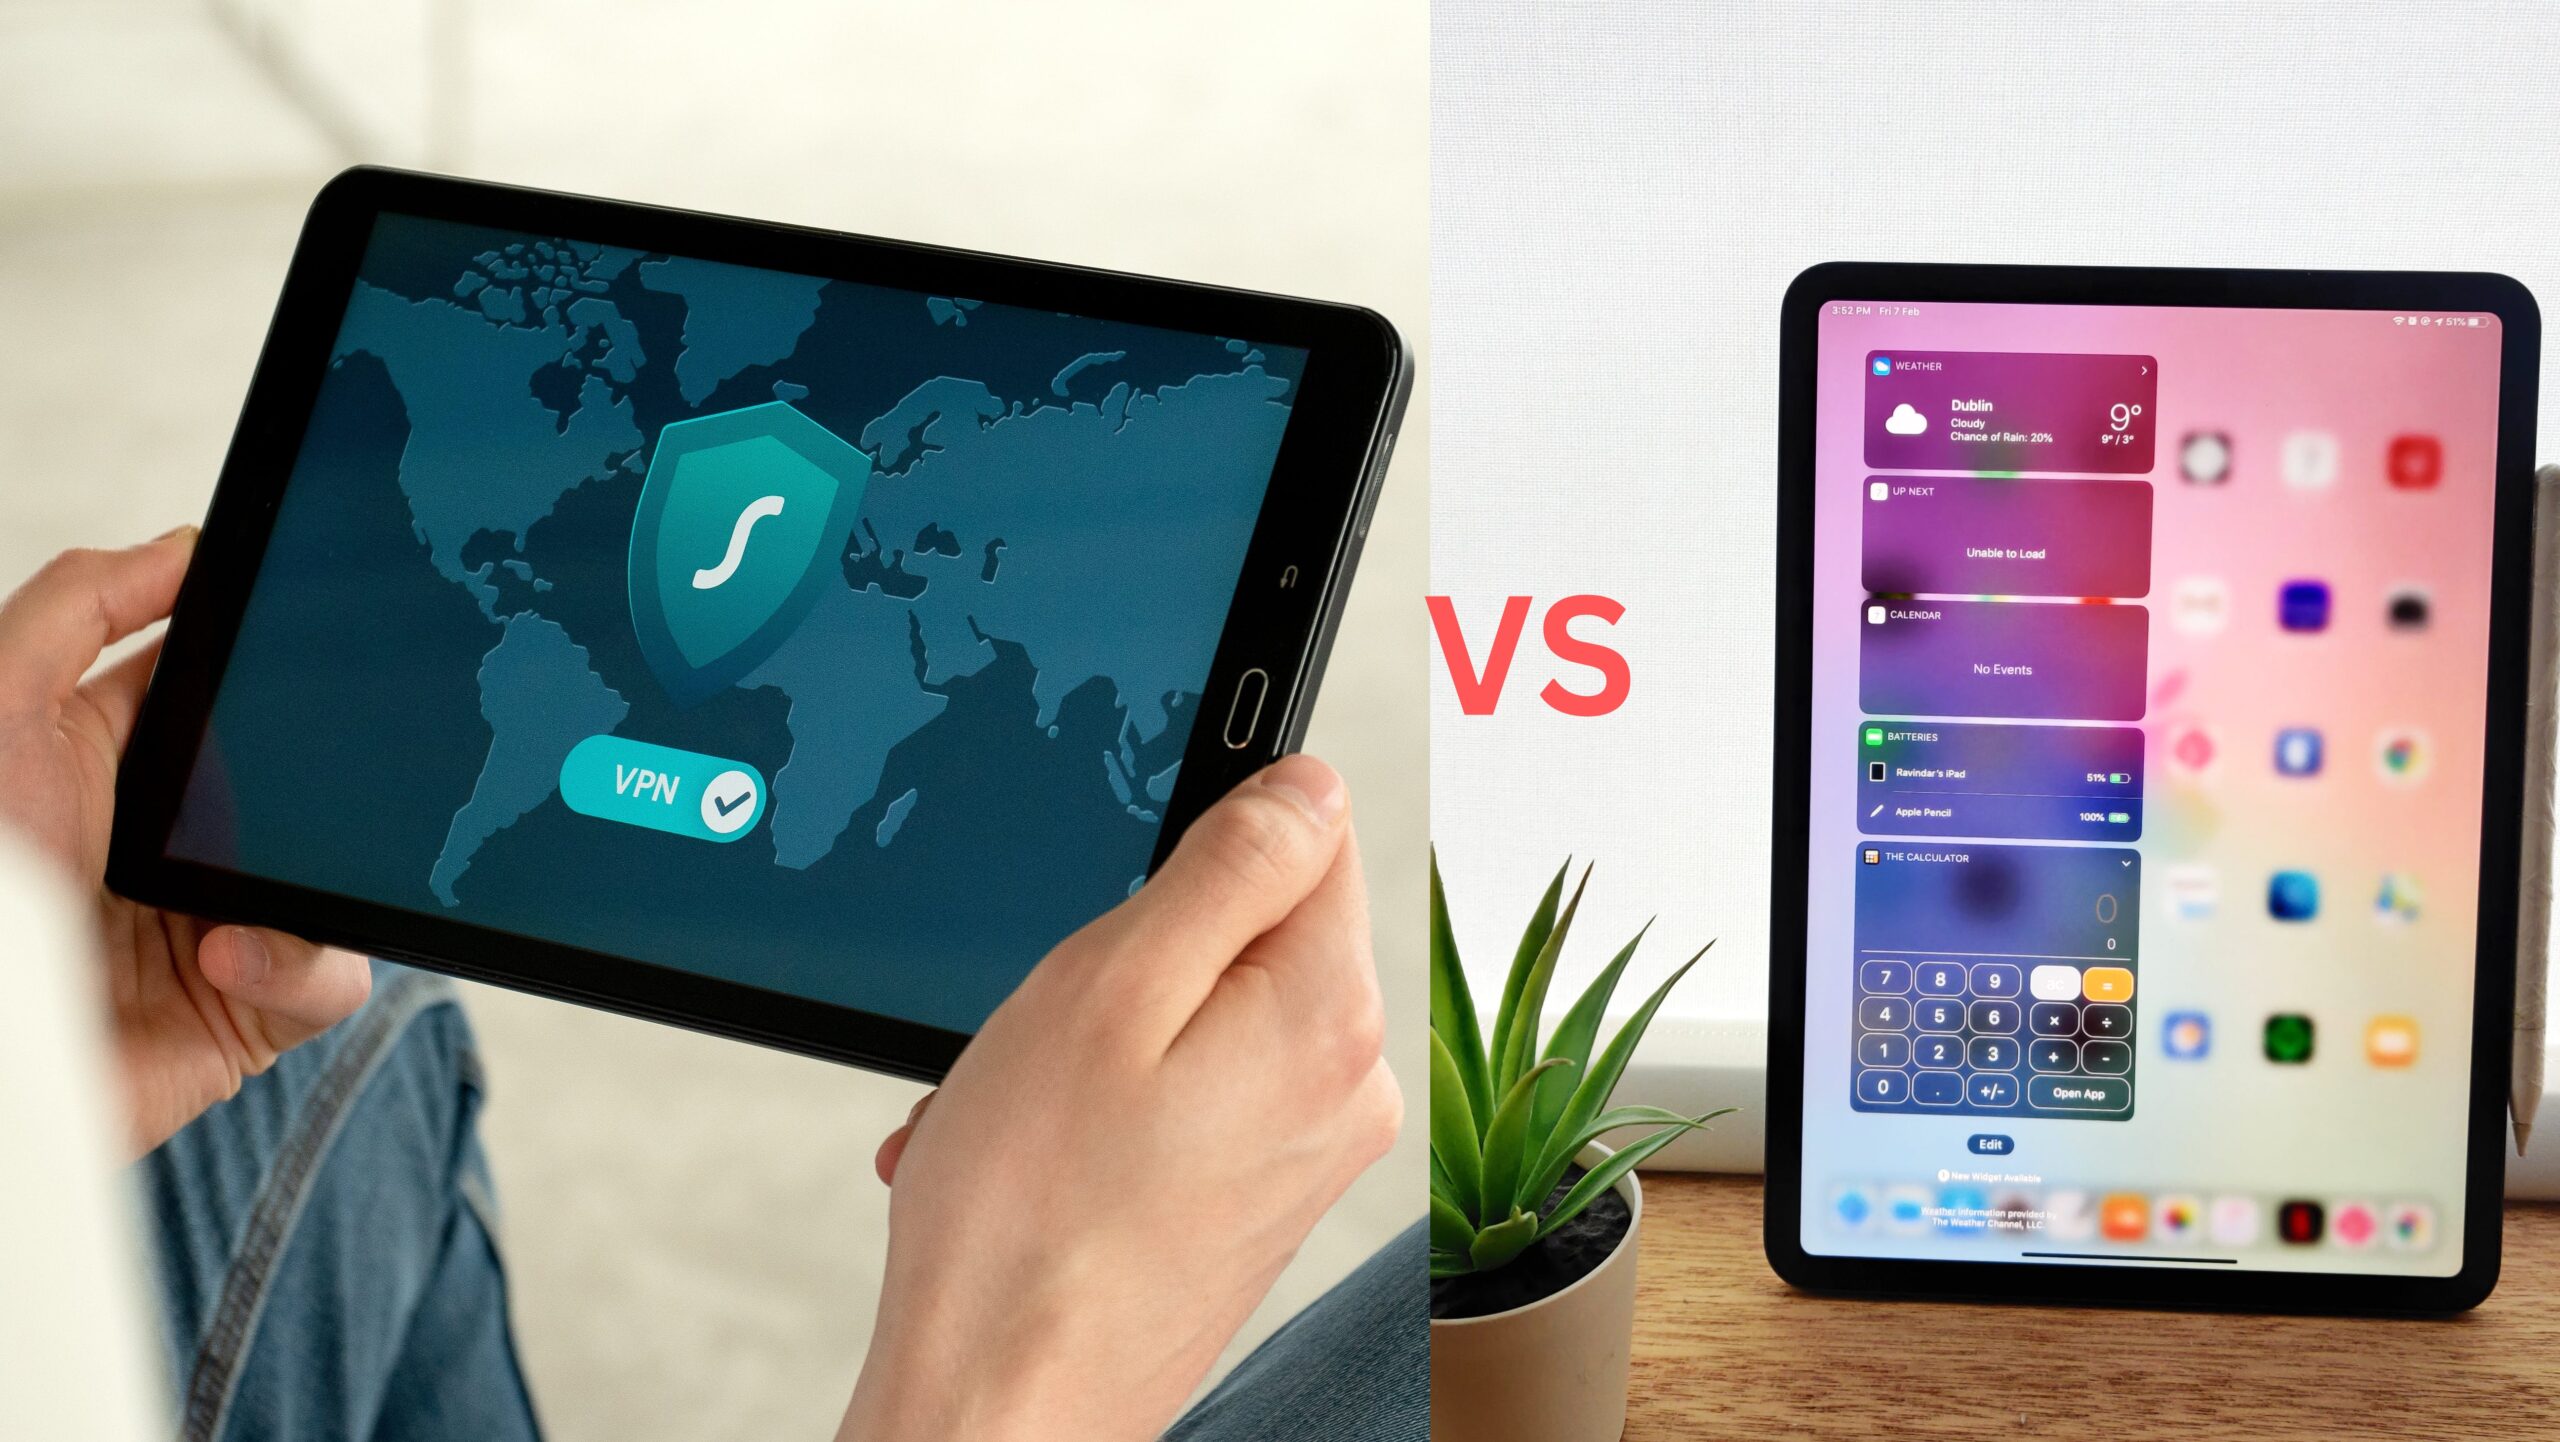 iPad or Samsung Tablet: Which is the Better Choice?